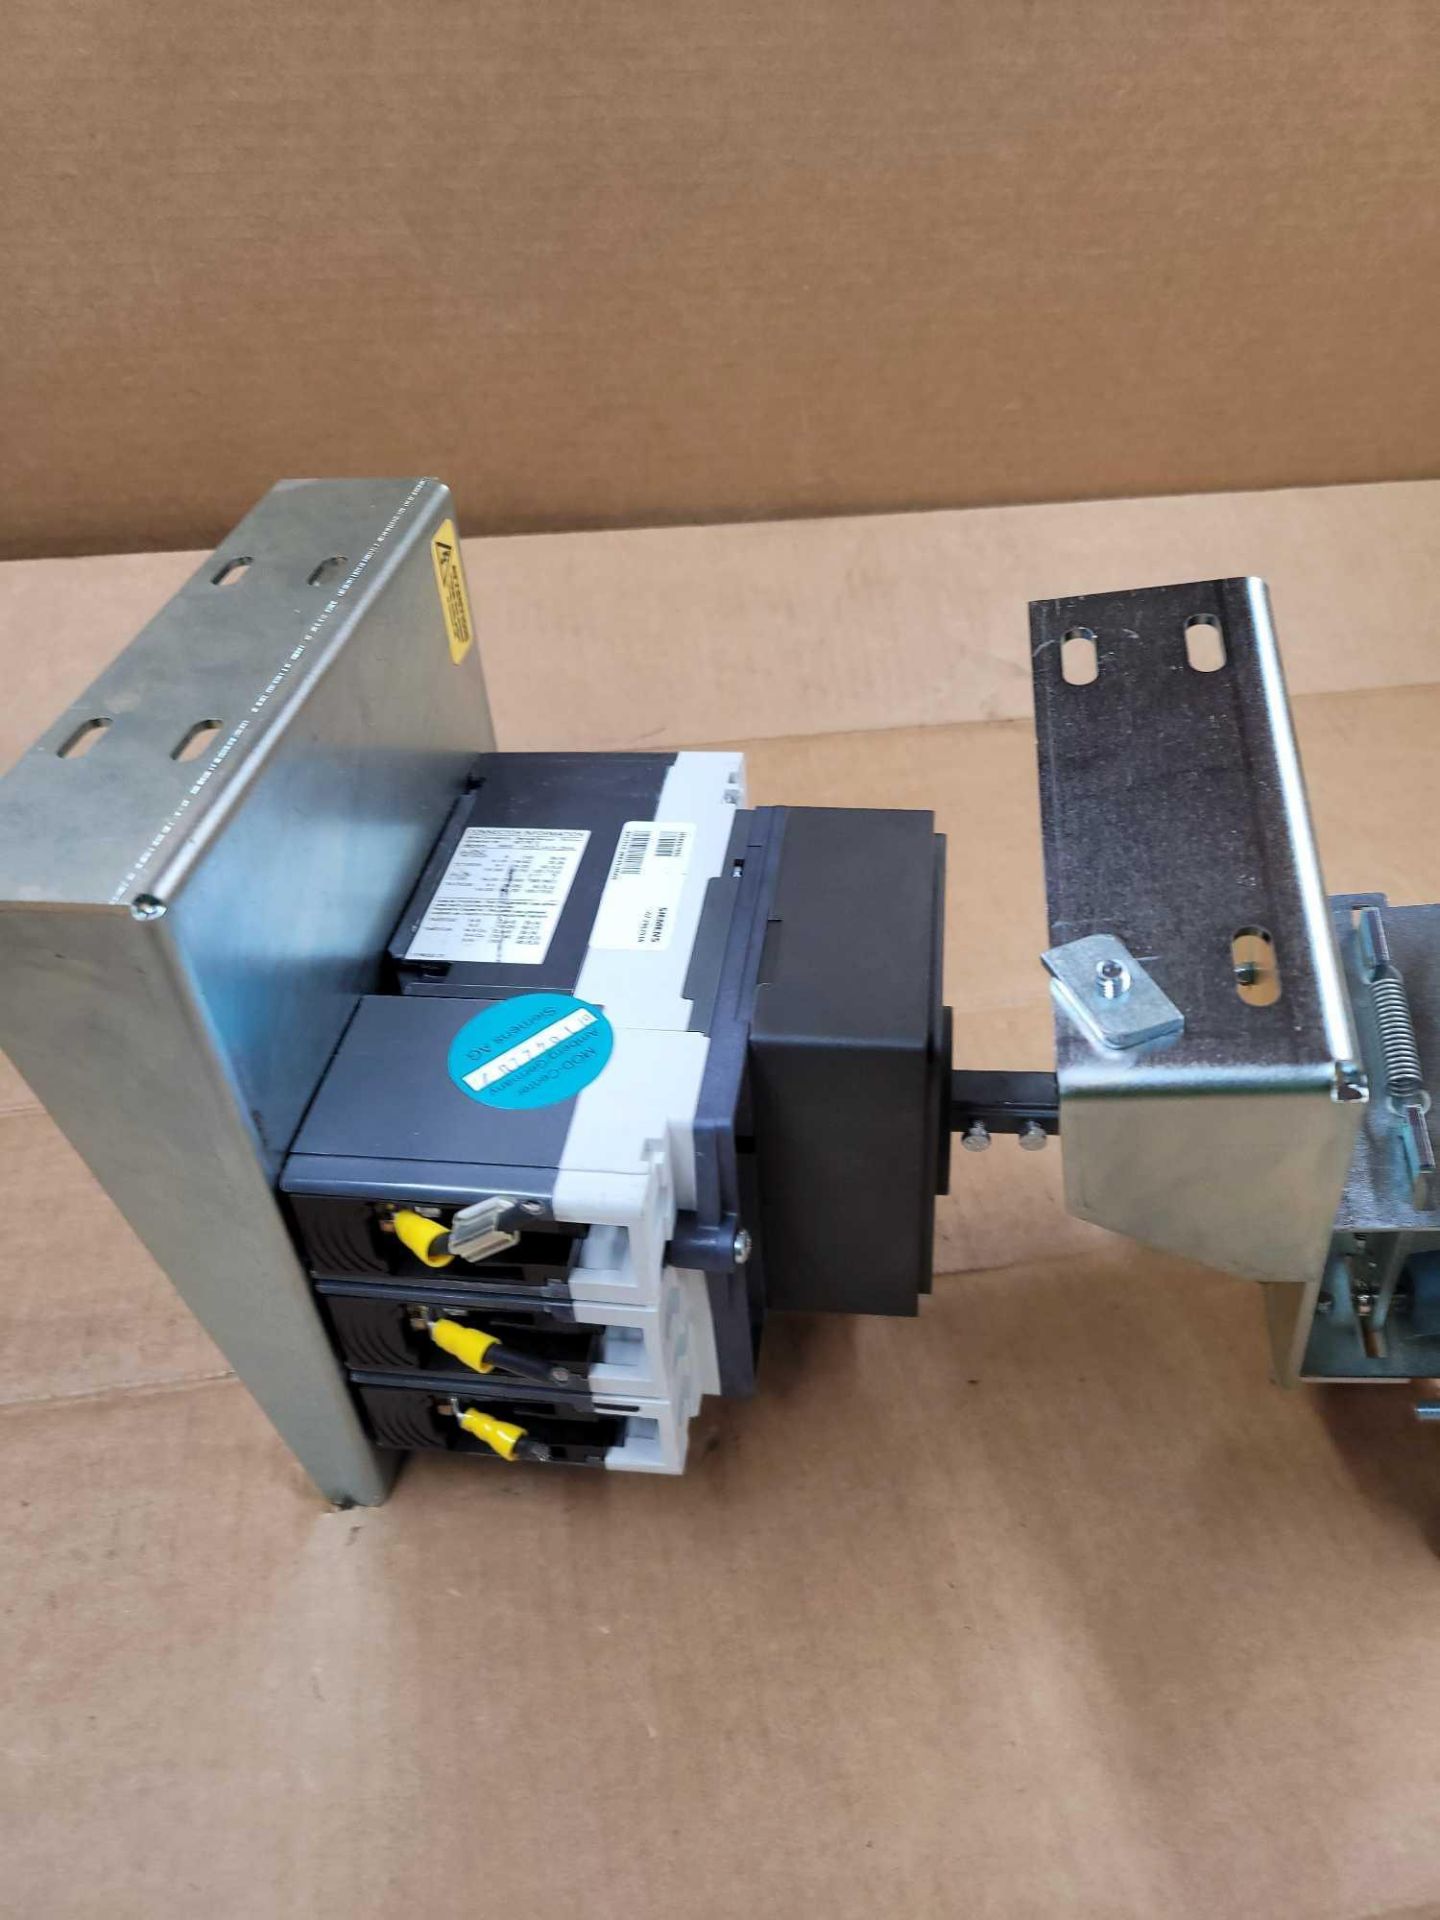 SIEMENS HDR3S150L with 3VL9300-3HE01 and SCA 90002.919005 / 150 Amp Circuit Breaker with Rotary Oper - Image 6 of 9